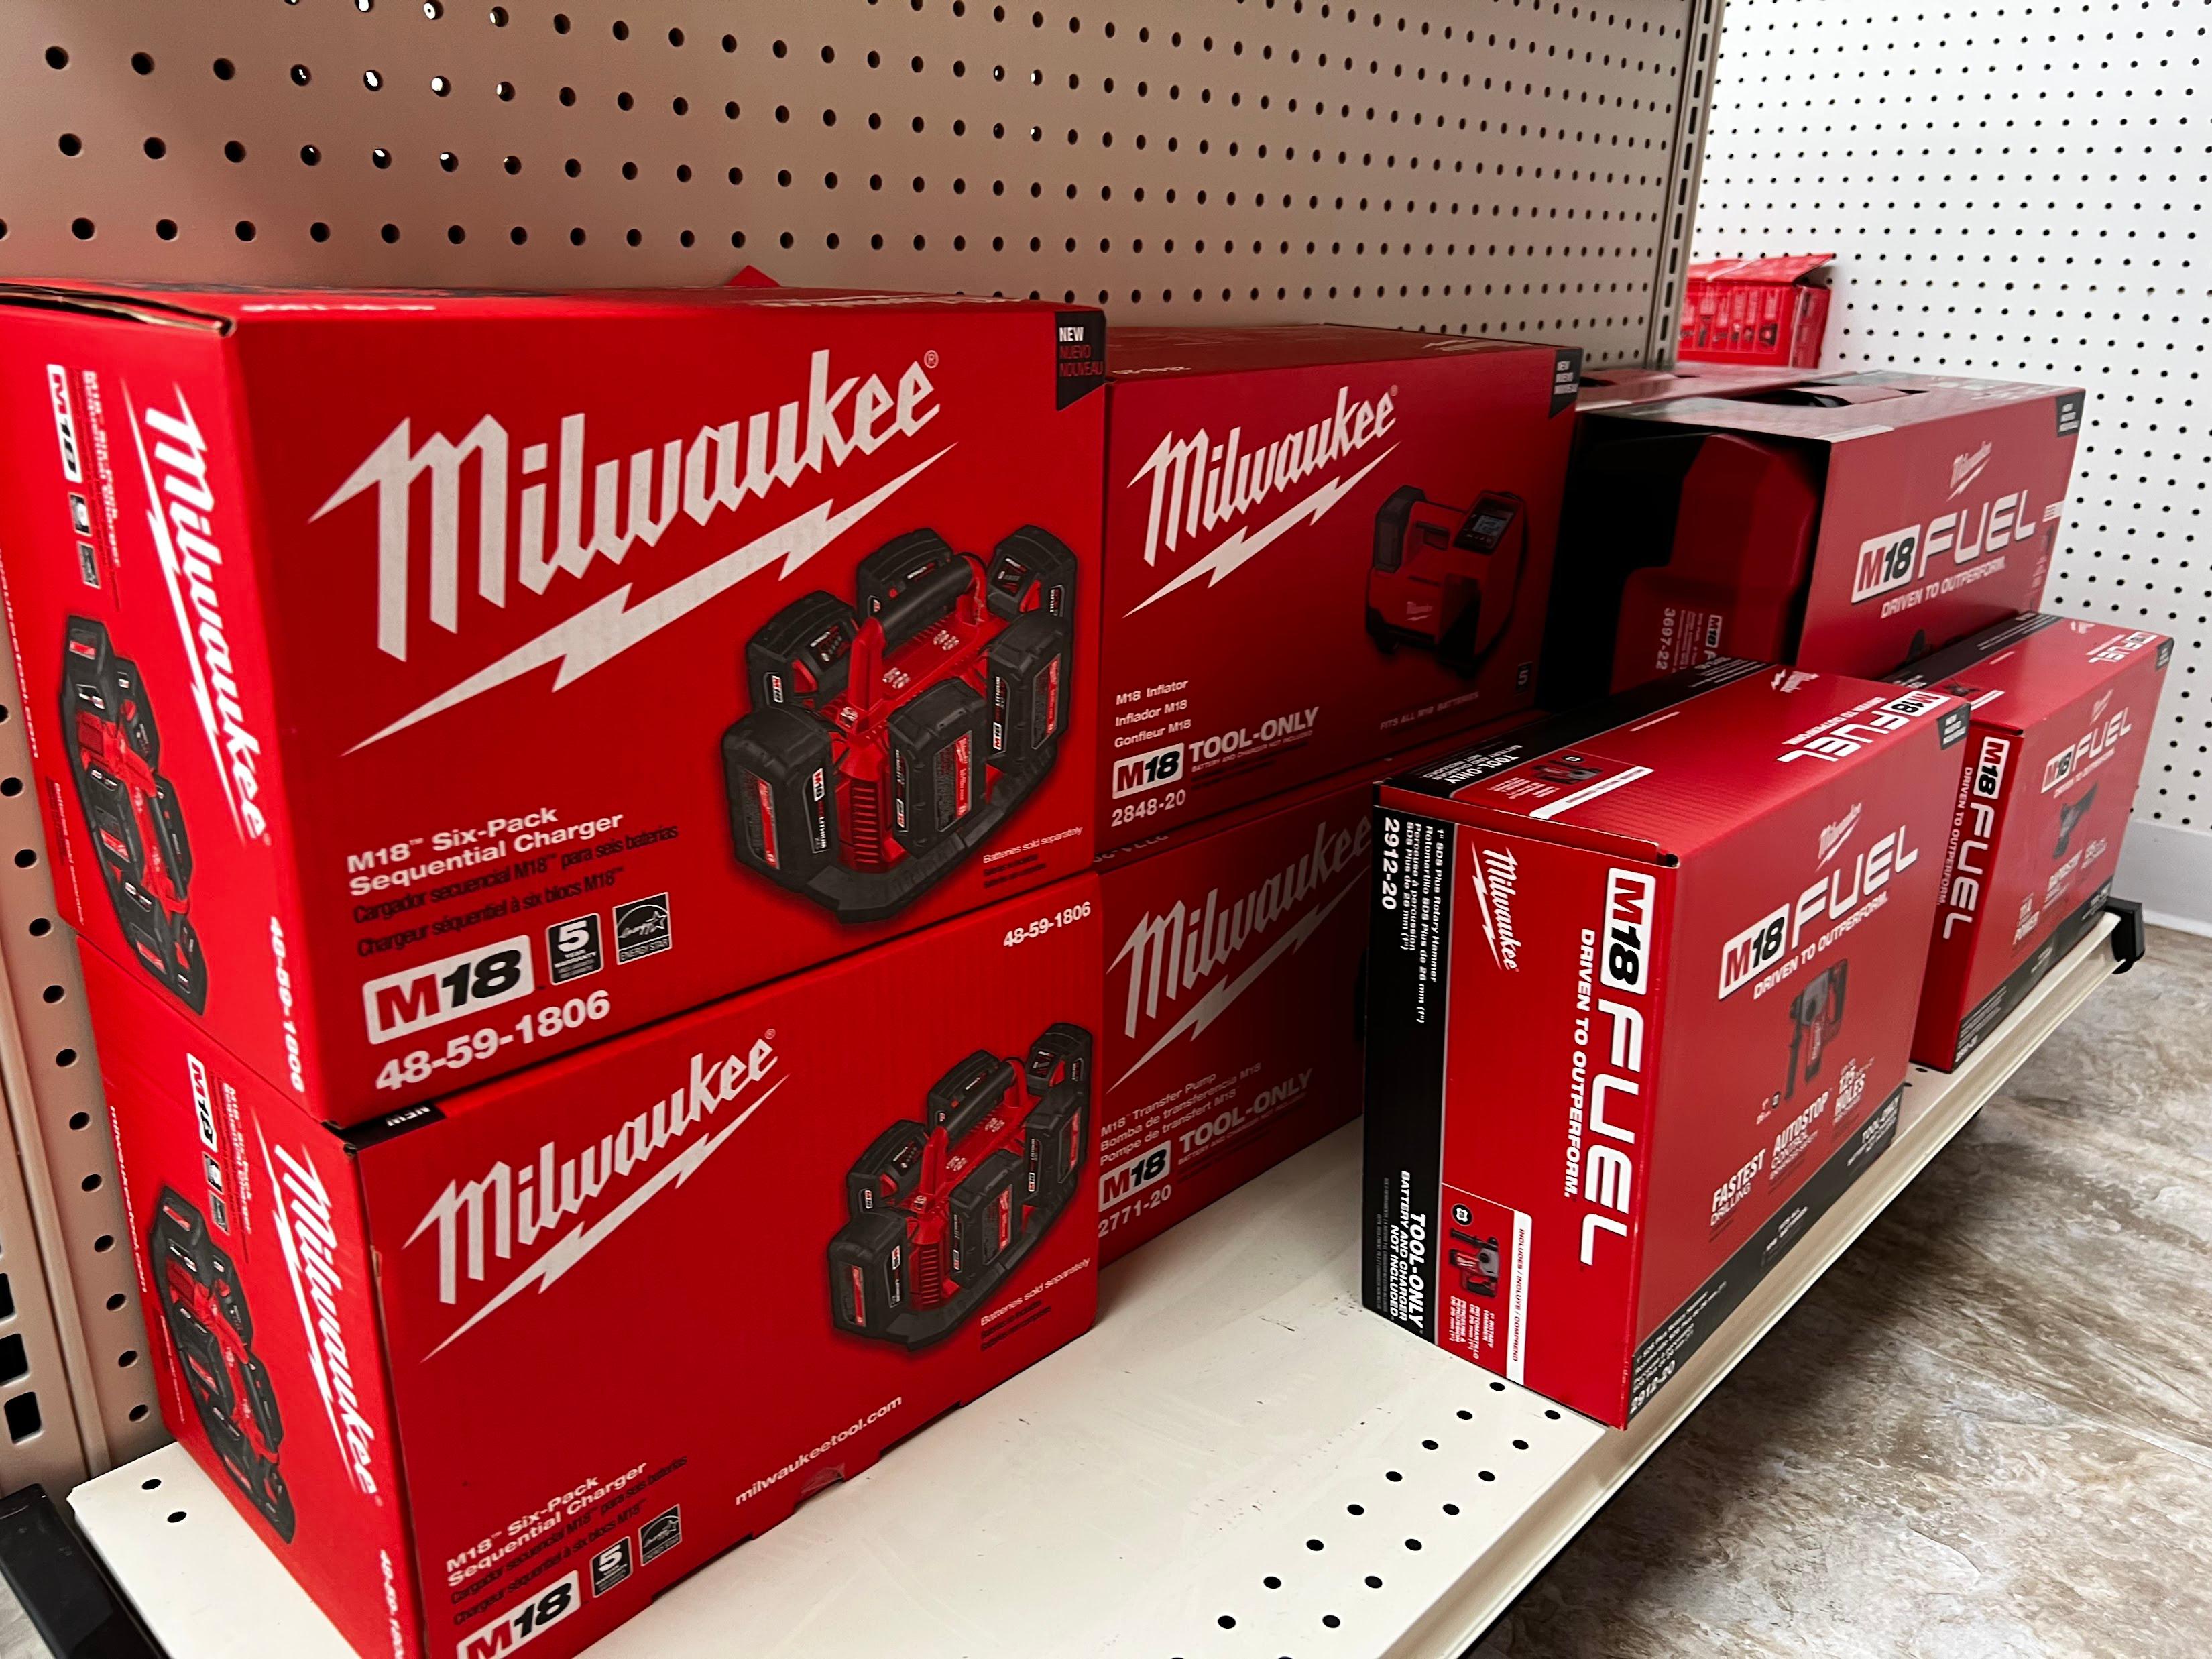 We are excited to announce that we now offer more brands including Milwaukee Tools, Cutter Diamond Products, Pelican coolers and mor